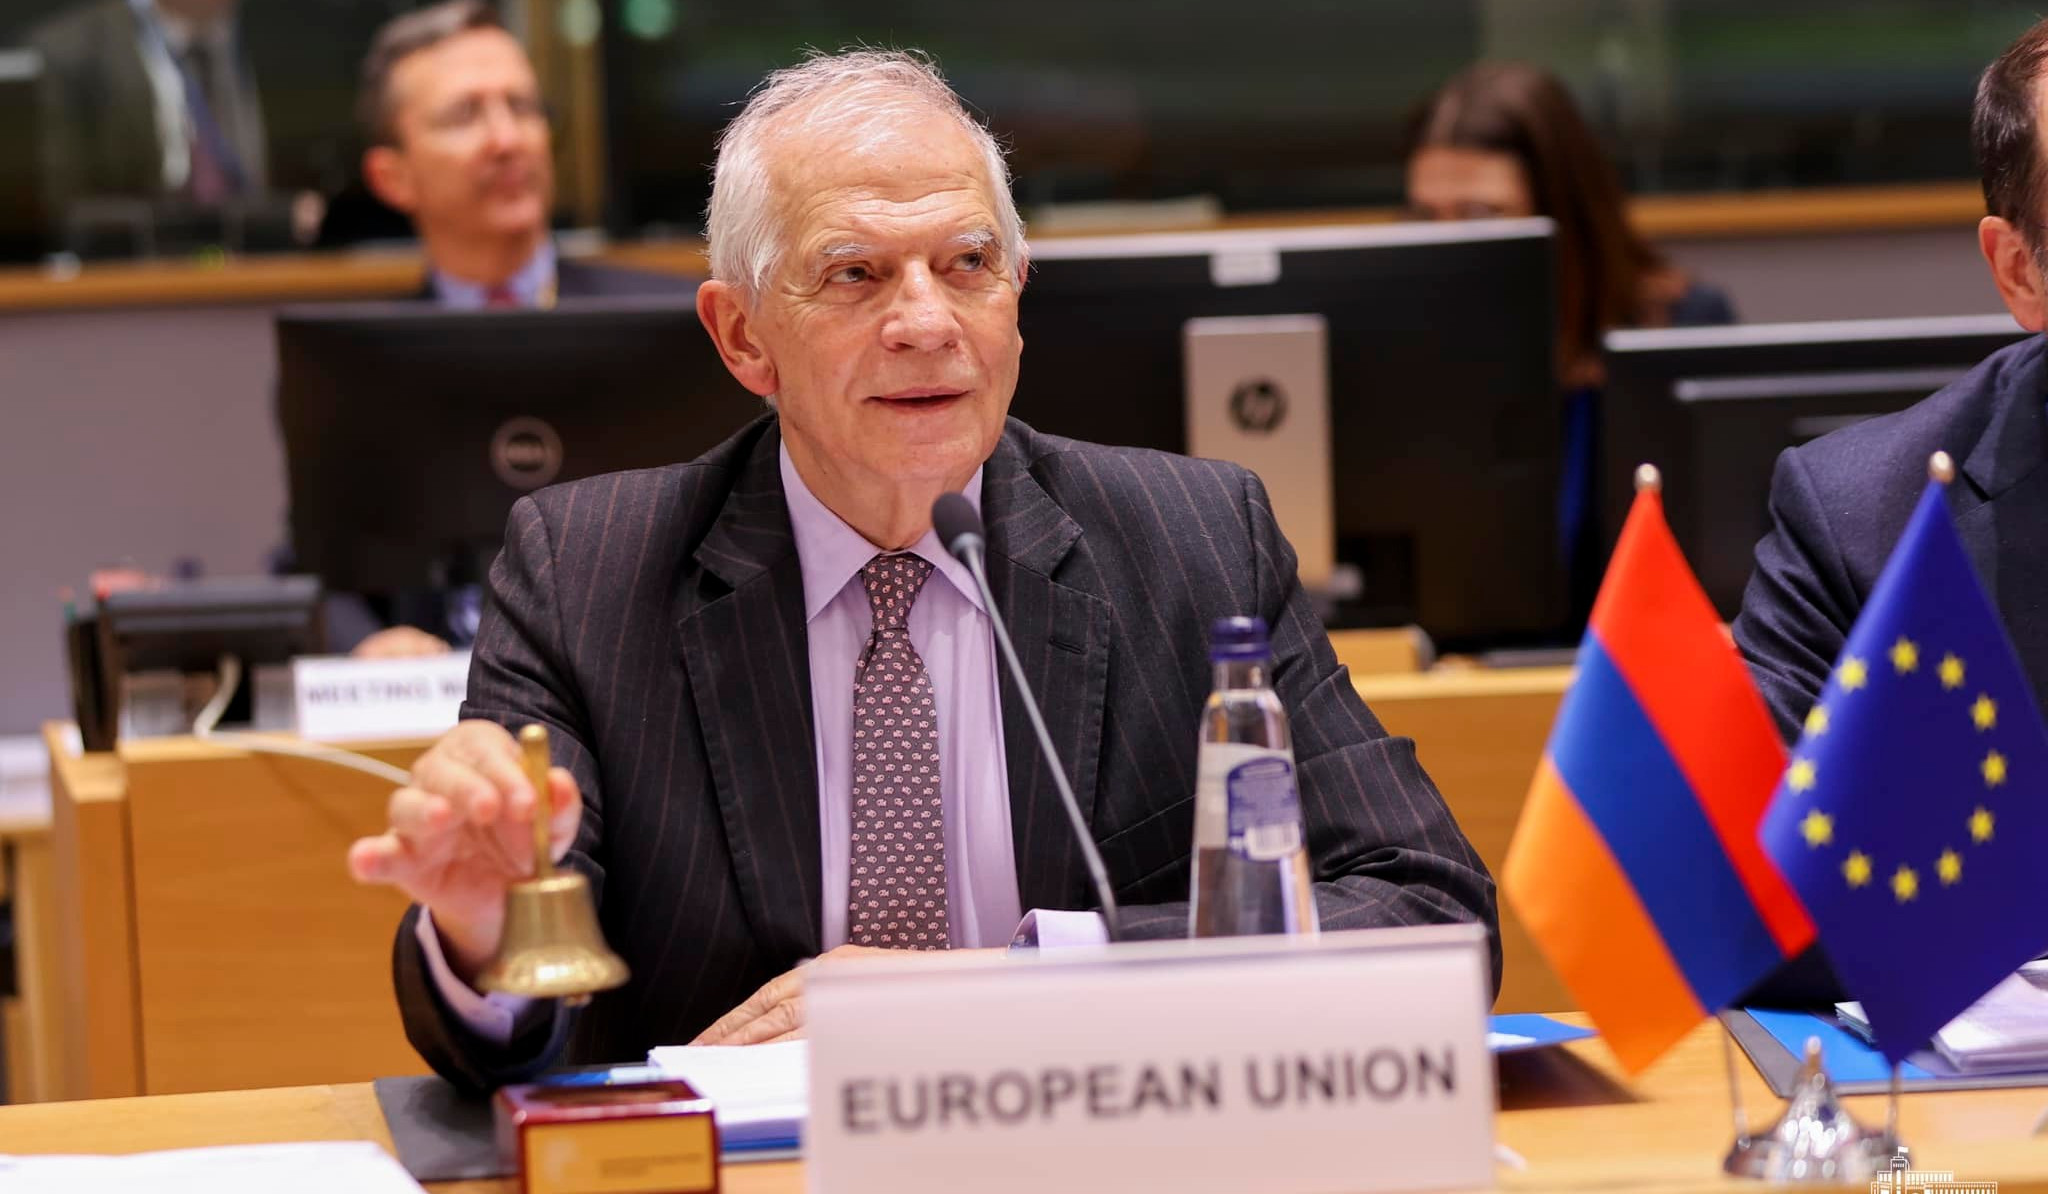 Discussed options to start a Visa Liberalisation Dialogue between European Union and Armenia, Borrell